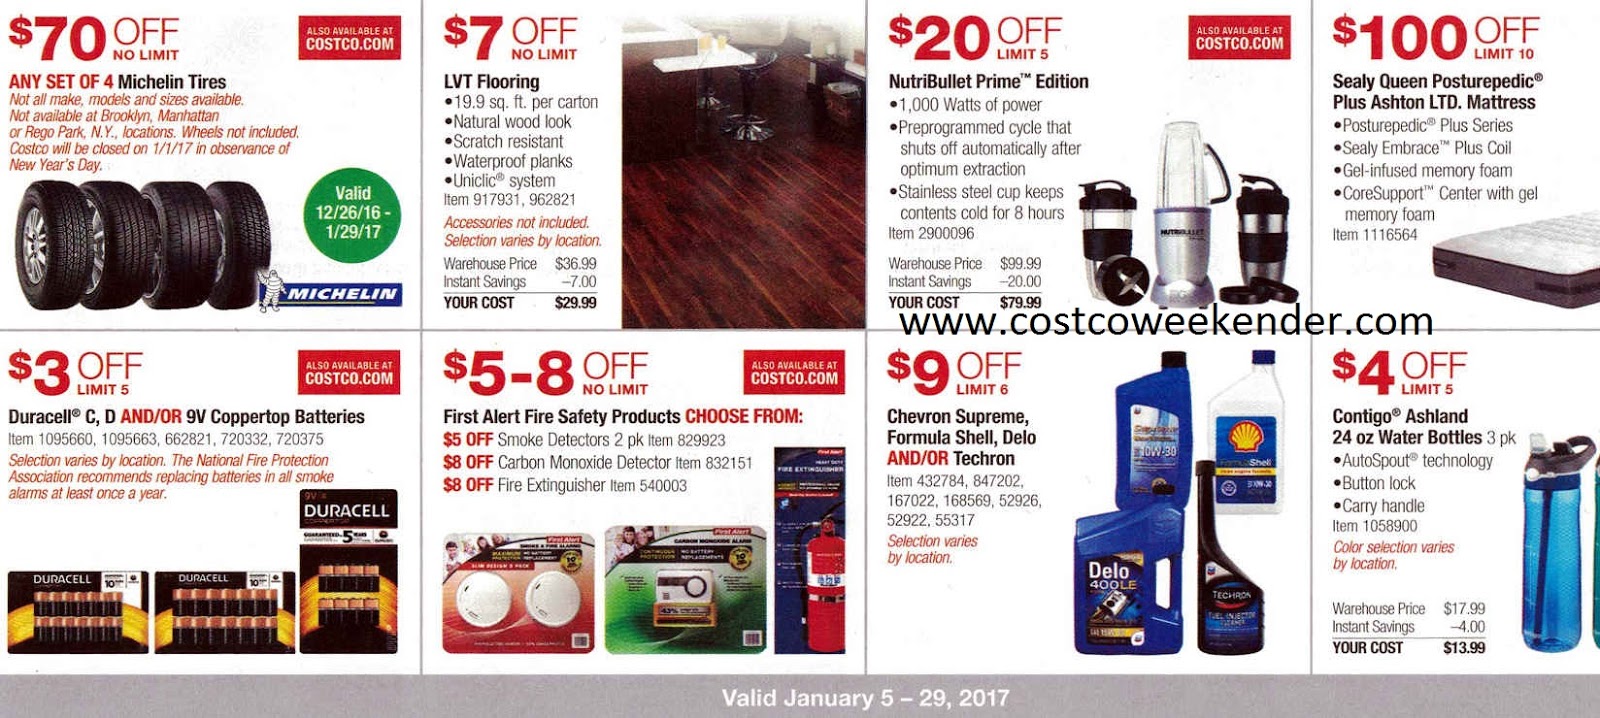 Current Costco Coupon Book January 2017 Costco Weekender